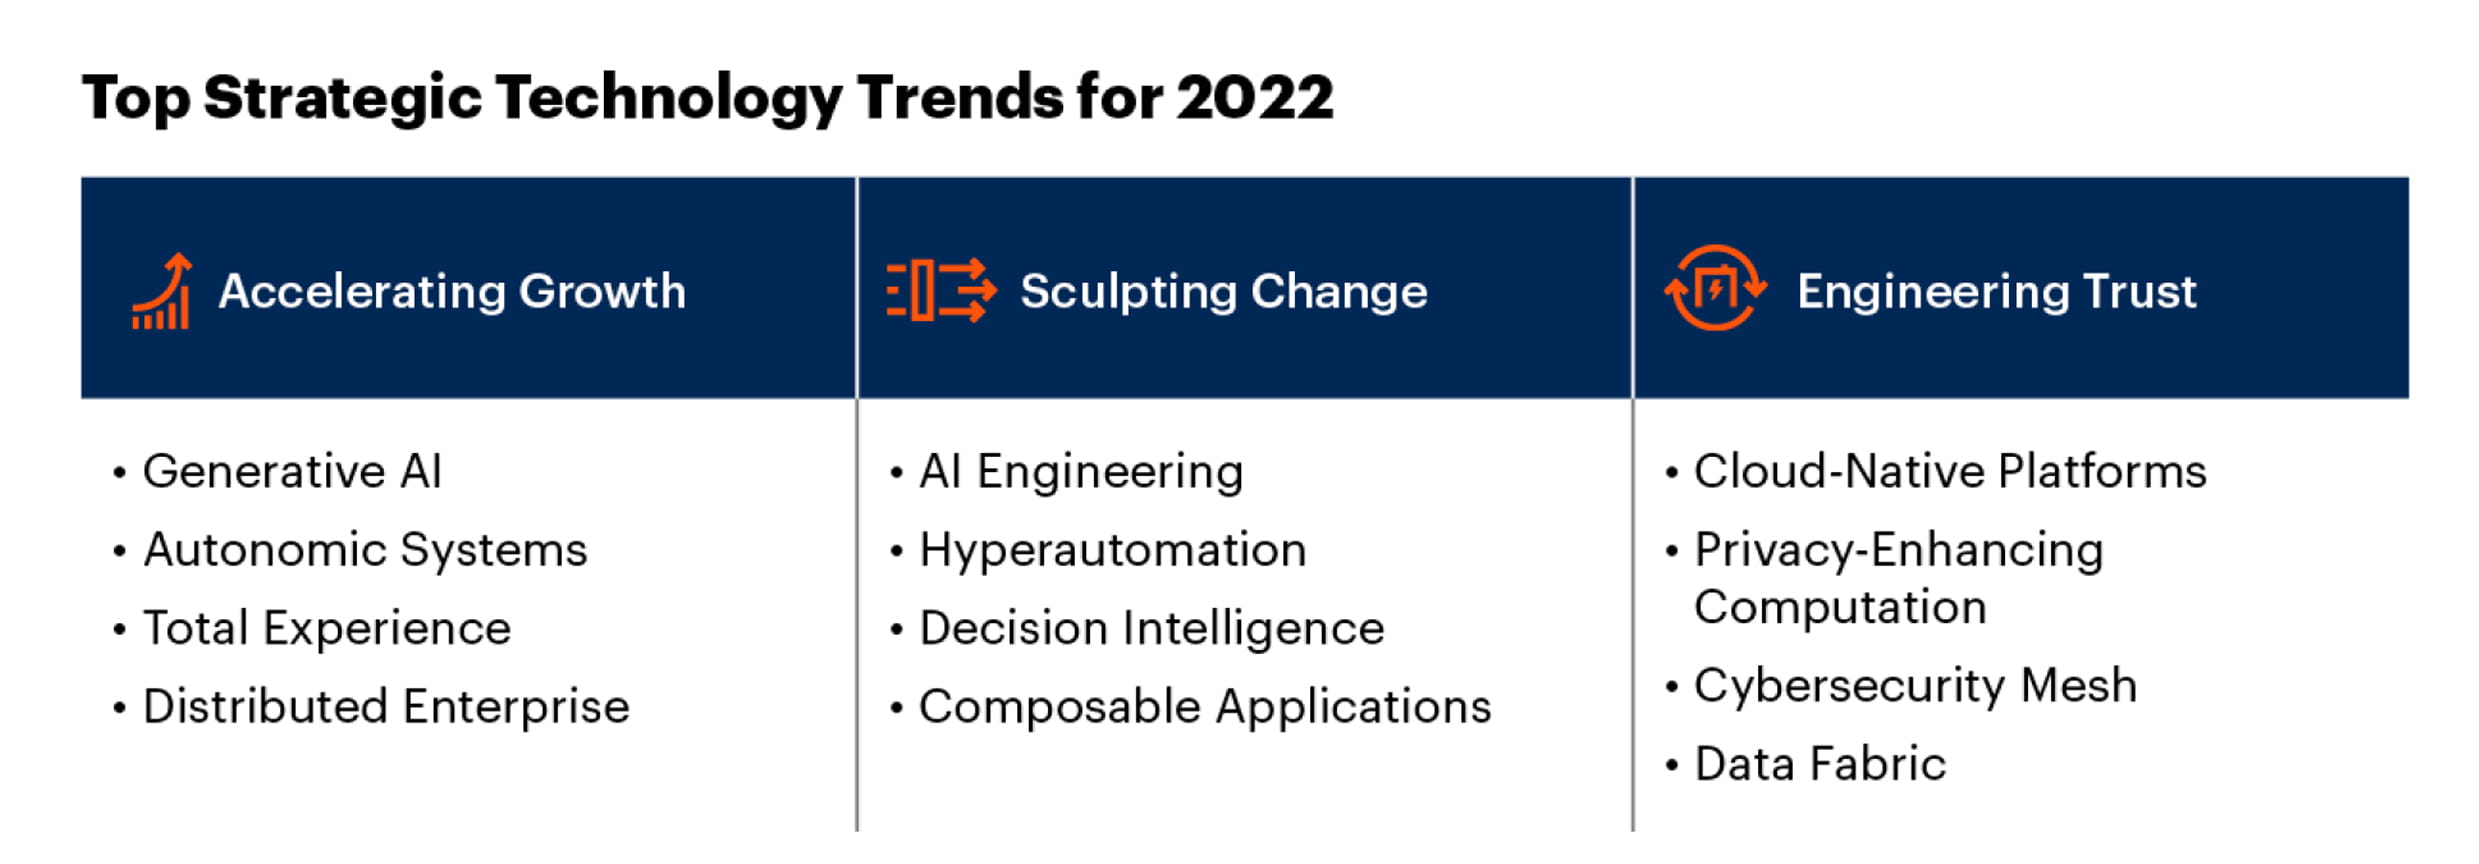 7 strategic technology trends for business to unlock growth in 2022 1